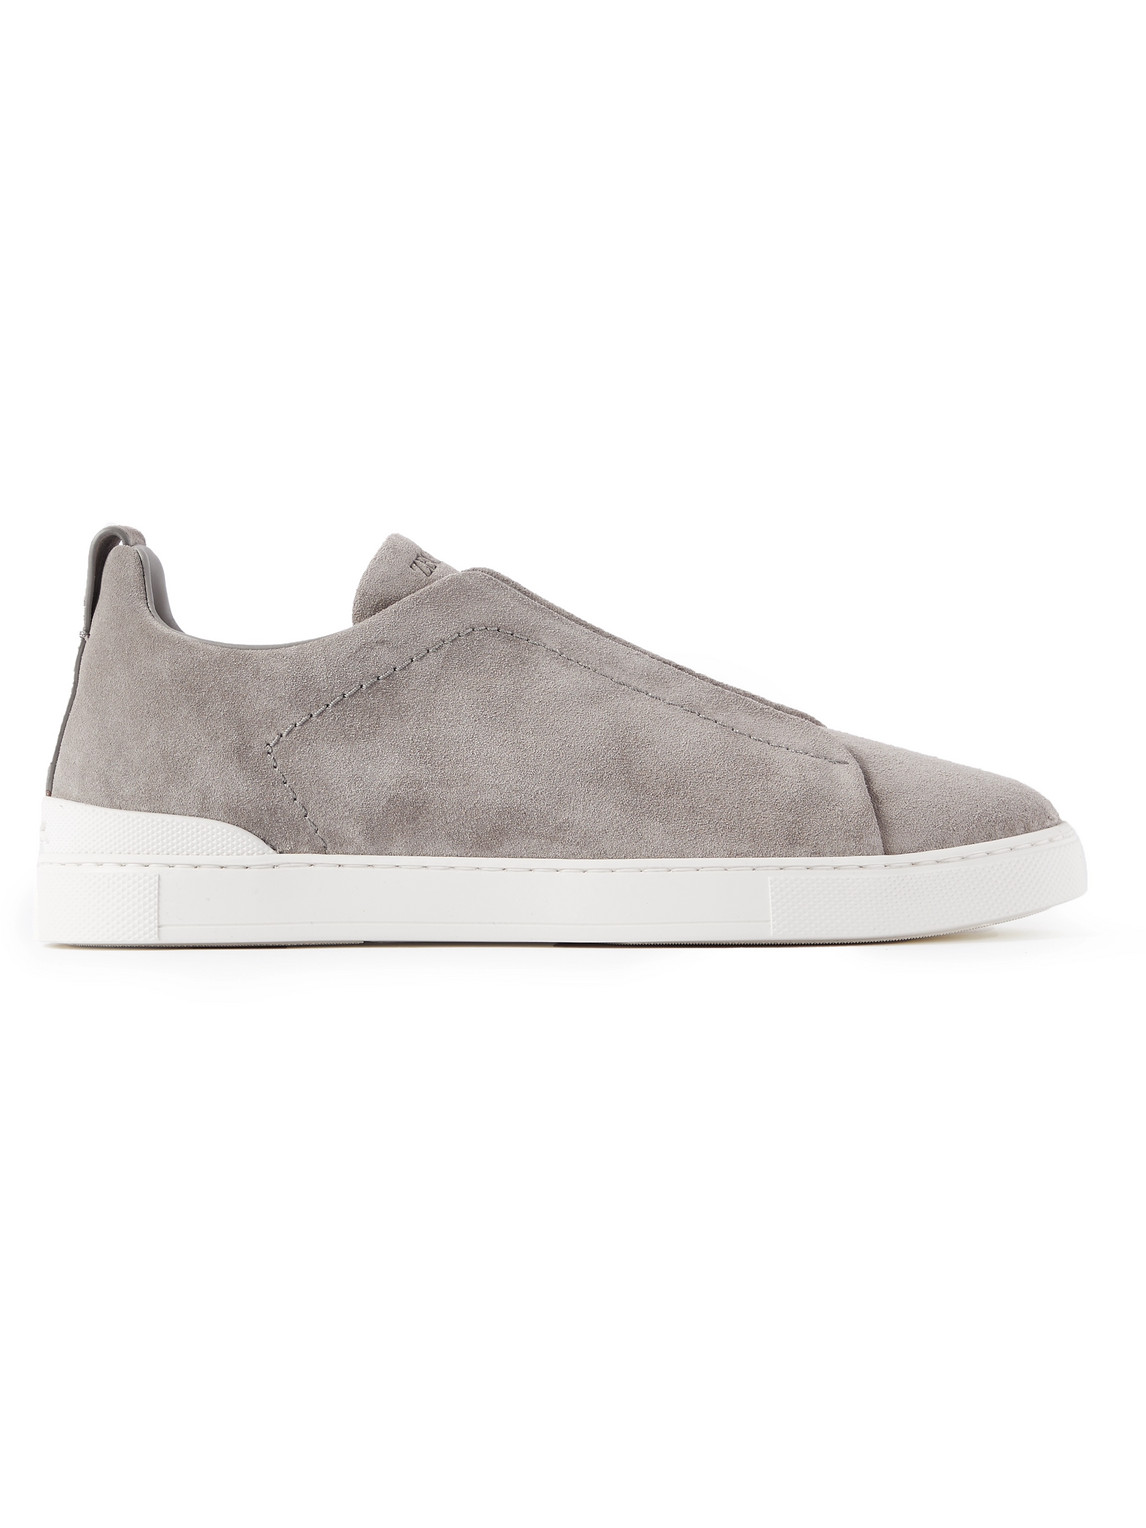 ZEGNA TRIPLE STITCH SUEDE SNEAKERS